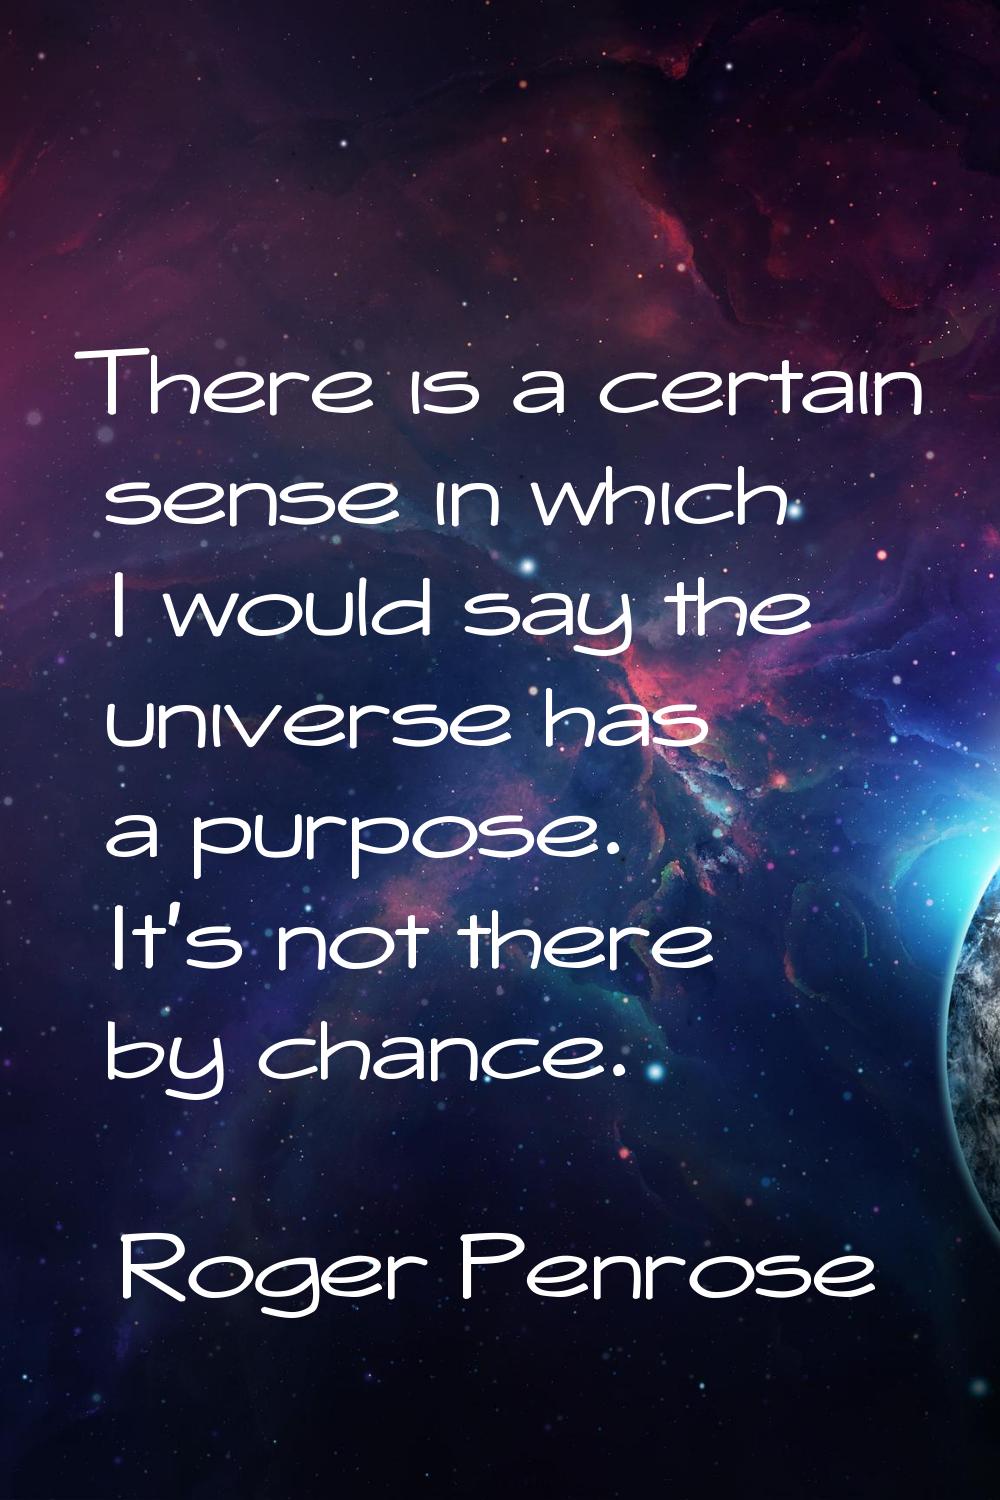 There is a certain sense in which I would say the universe has a purpose. It's not there by chance.